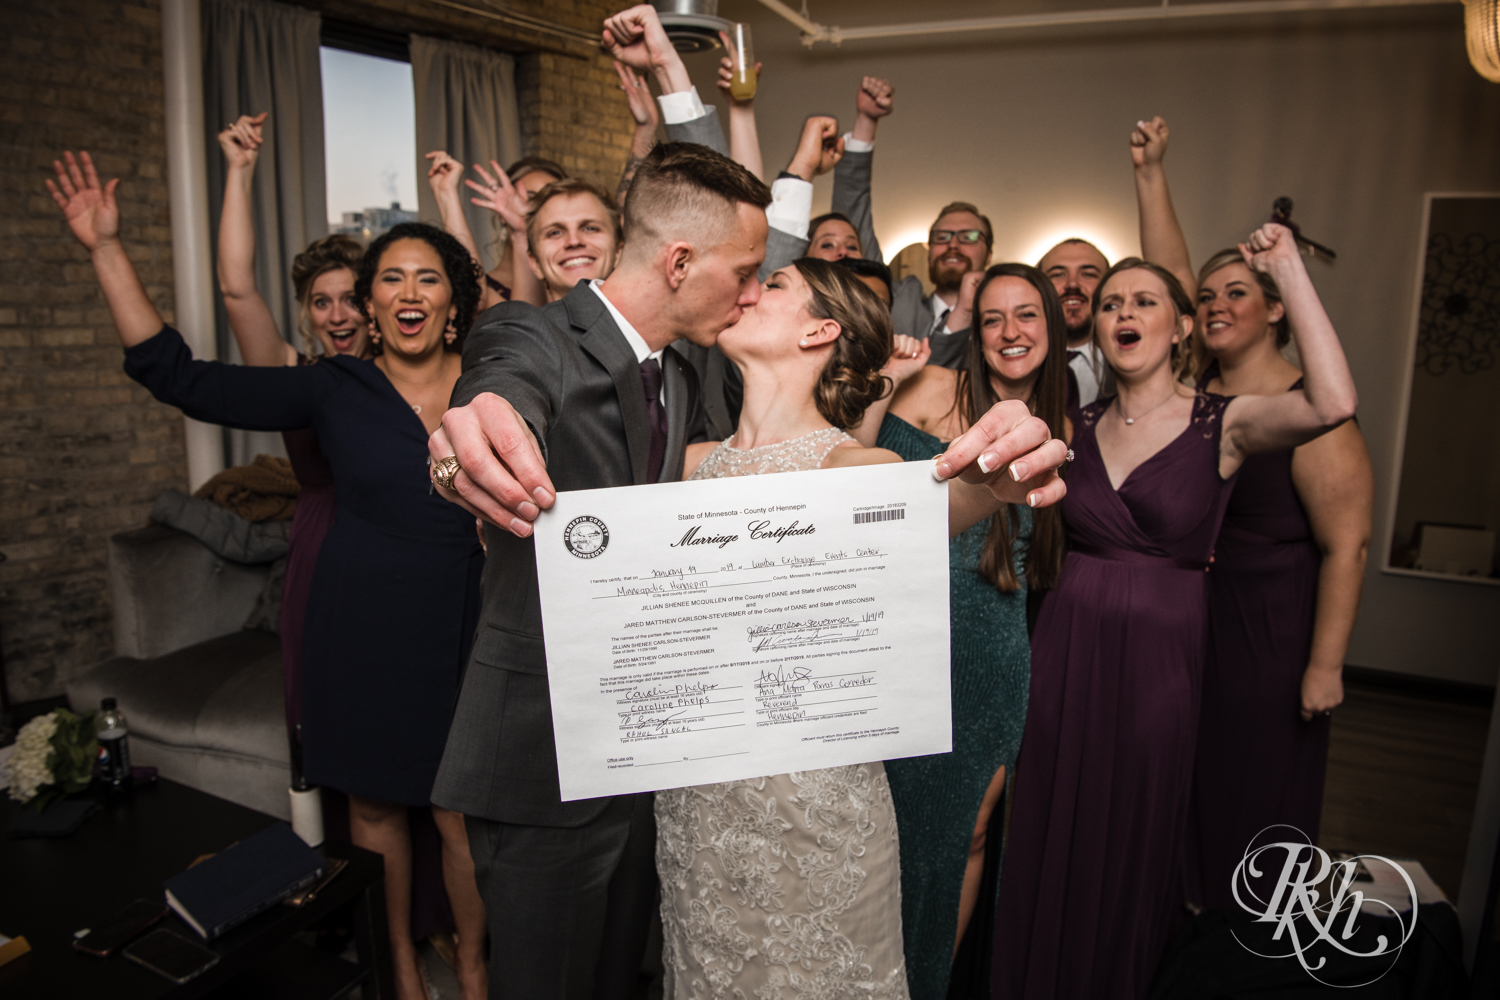 Bride and groom kiss behind marriage certificate at the Lumber Exchange Event Center in Minneapolis, Minnesota.